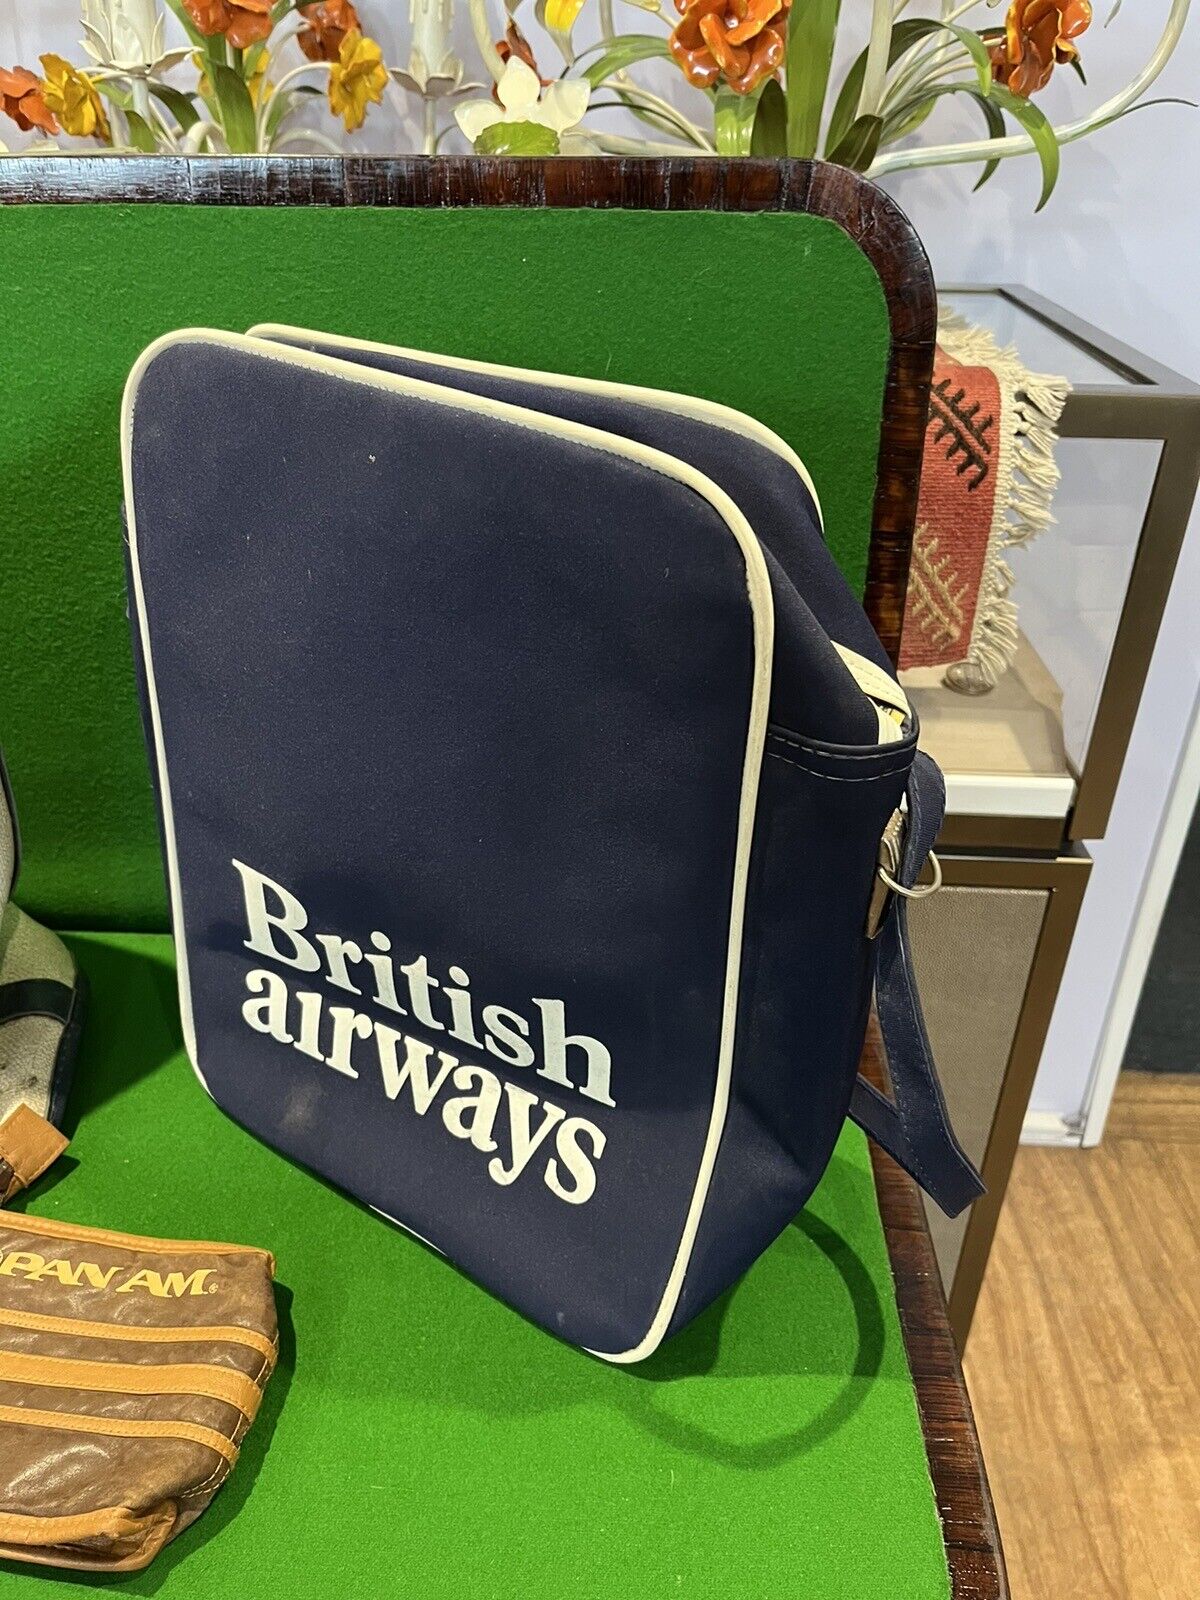 Vintage British Airways, Pan-am & Monarch airlines Flight Bags And Small Bag